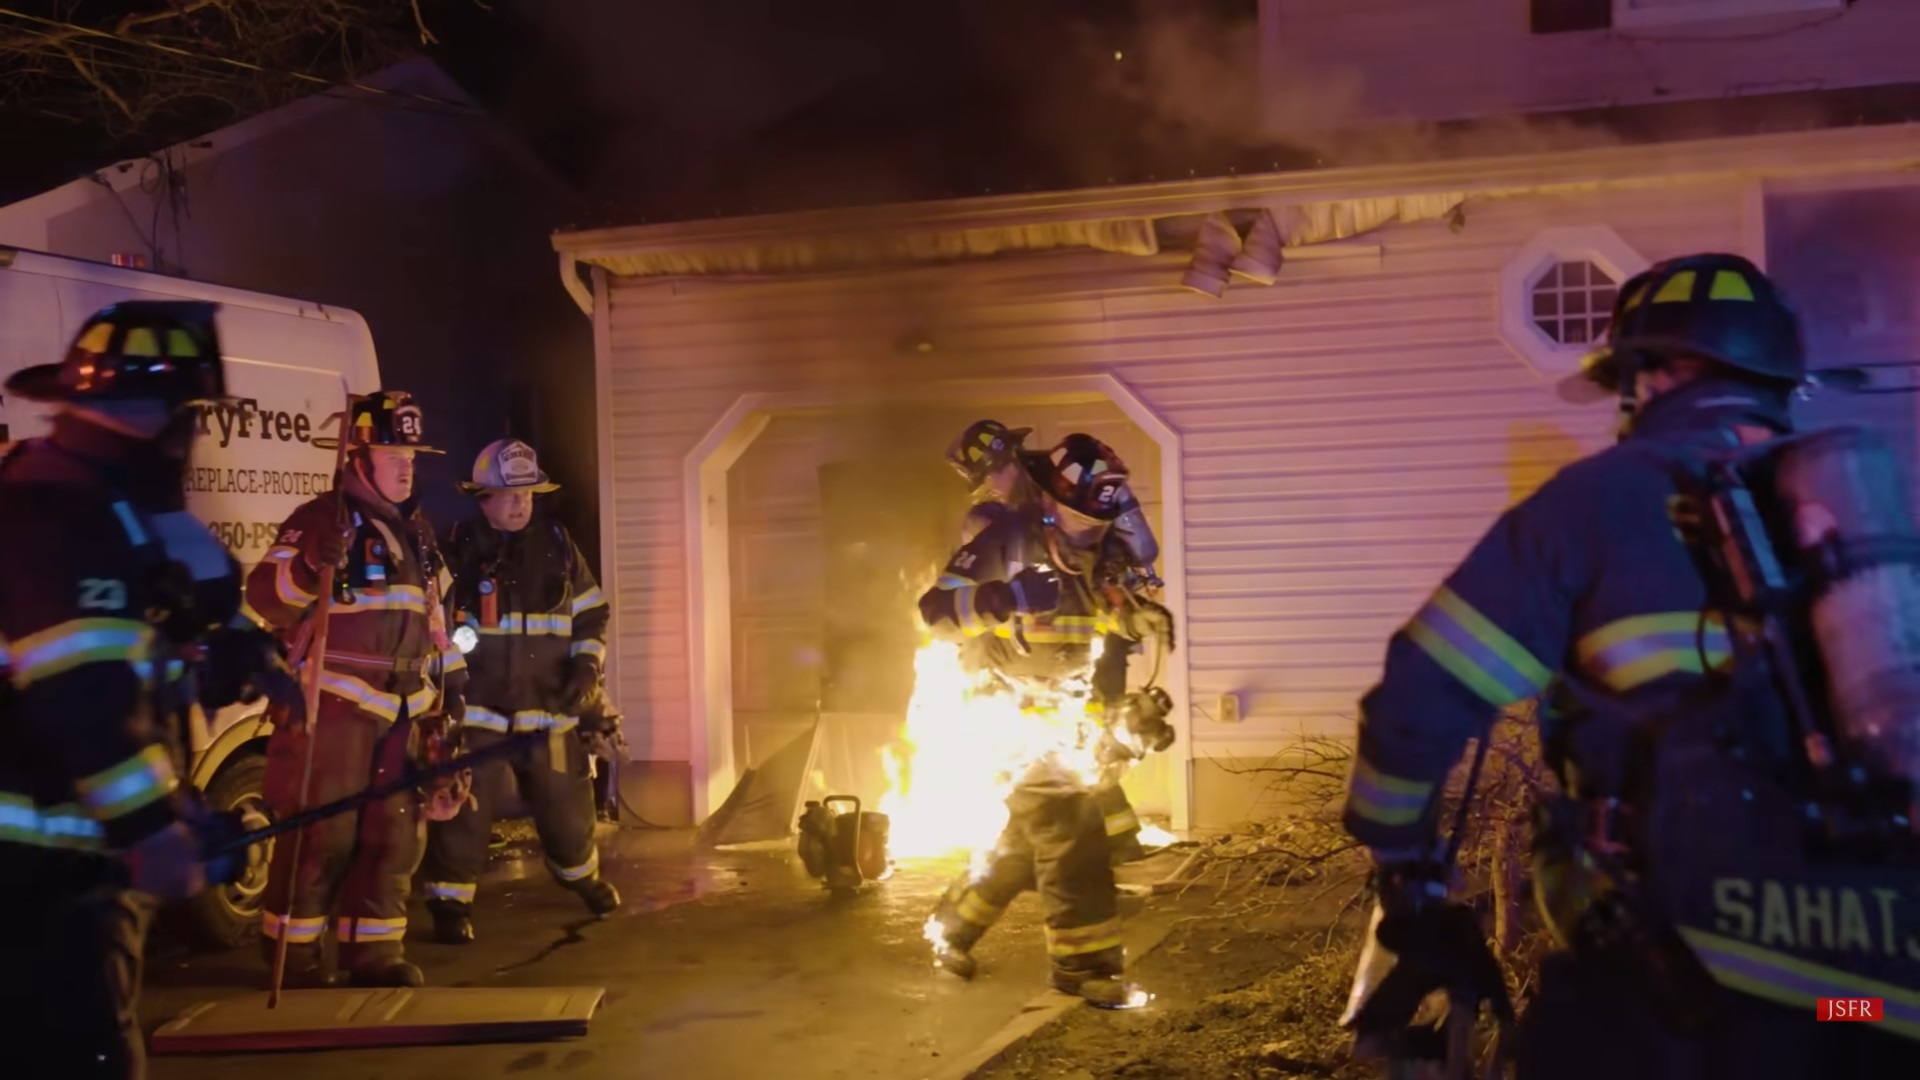 Caught on camera: Firefighter catches fire at NJ house fire